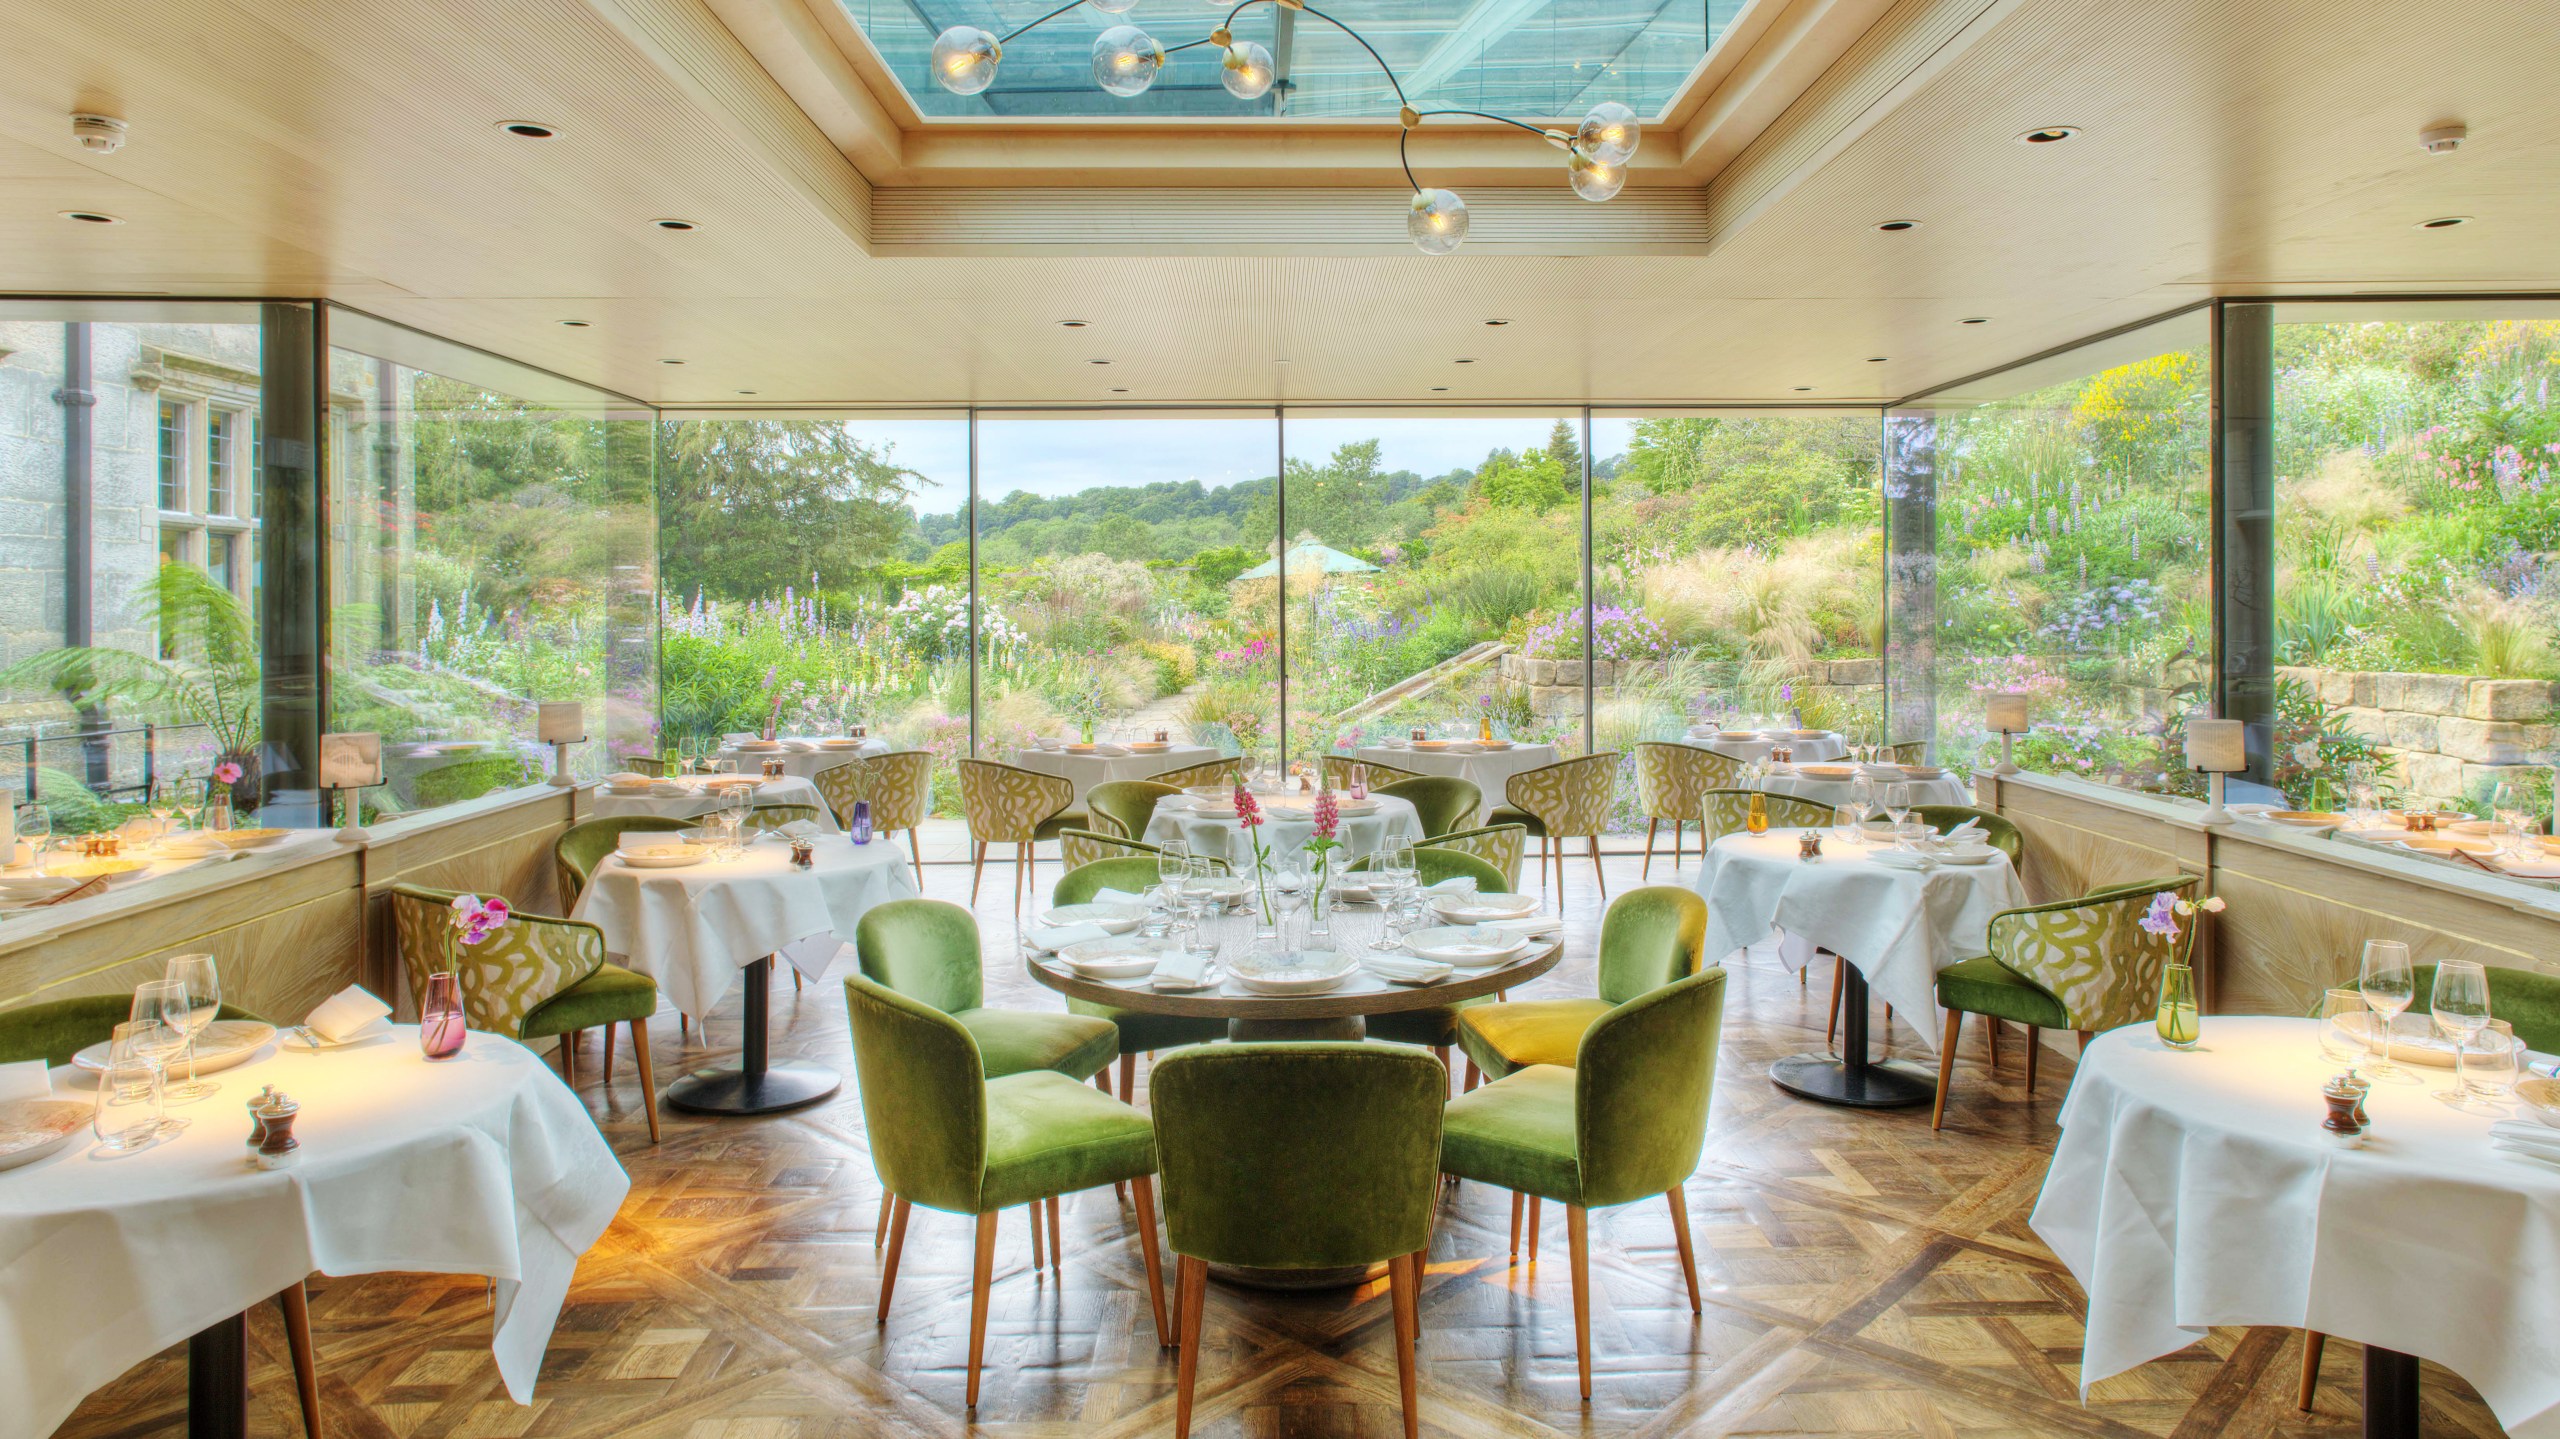 The glass-box restaurant, launched in 2018, offers glorious garden views